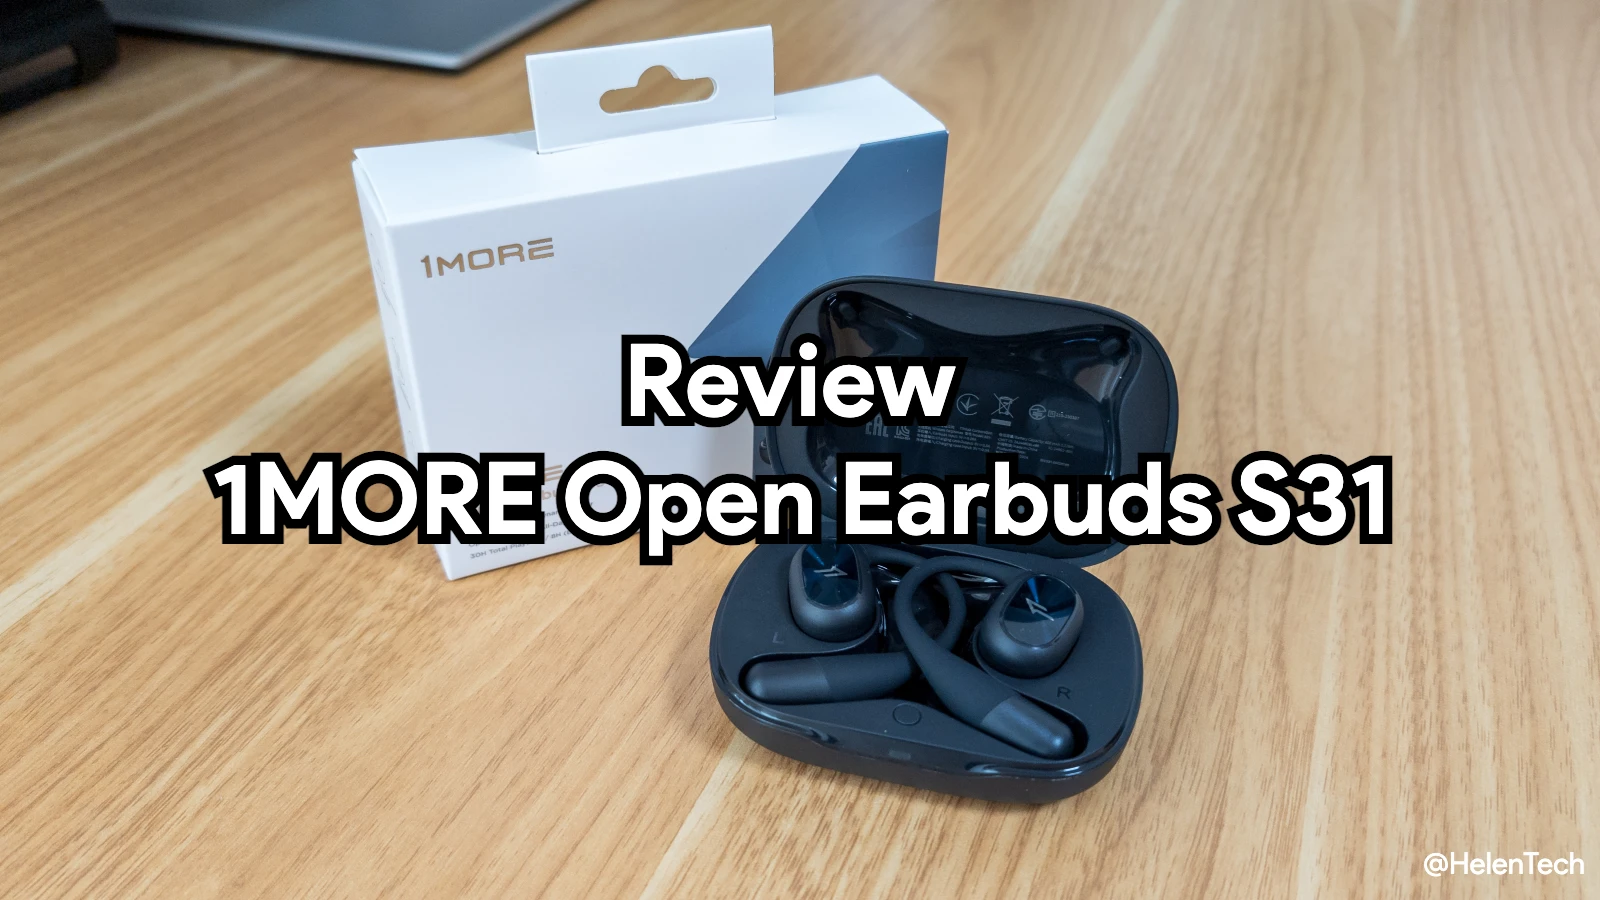 1MORE Open Earbuds S31 を実機レビュー。手頃な価格でしっかりとしたオープンイヤーイヤホン